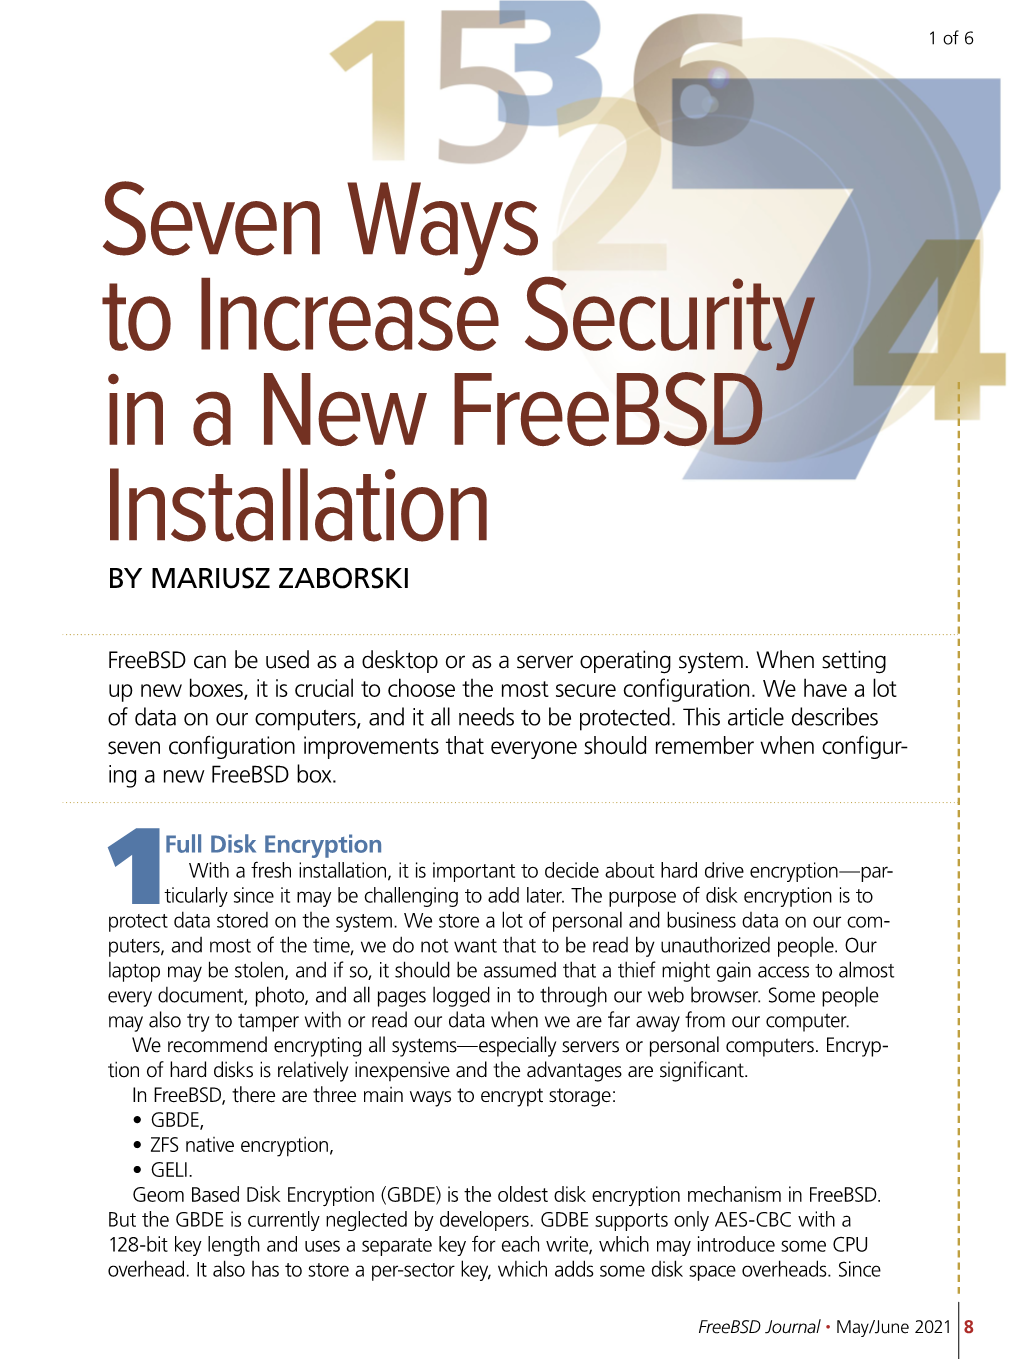 Seven Ways to Increase Security in a New Freebsd Installation by MARIUSZ ZABORSKI